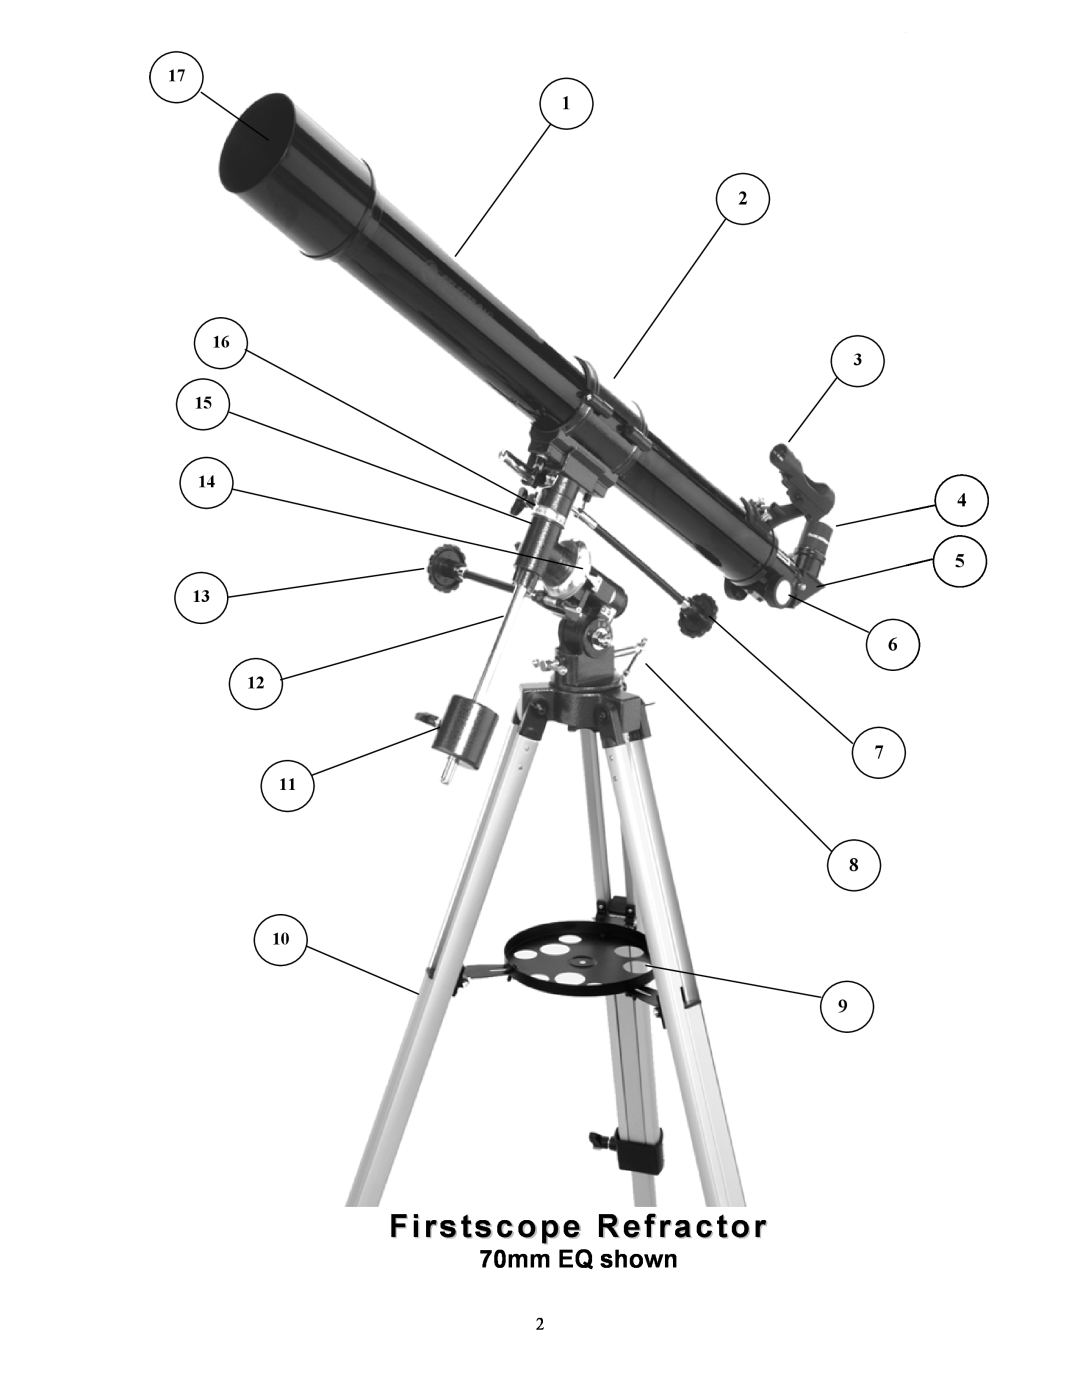 Celestron manual 70mm EQ shown, Firstscope Refractor 